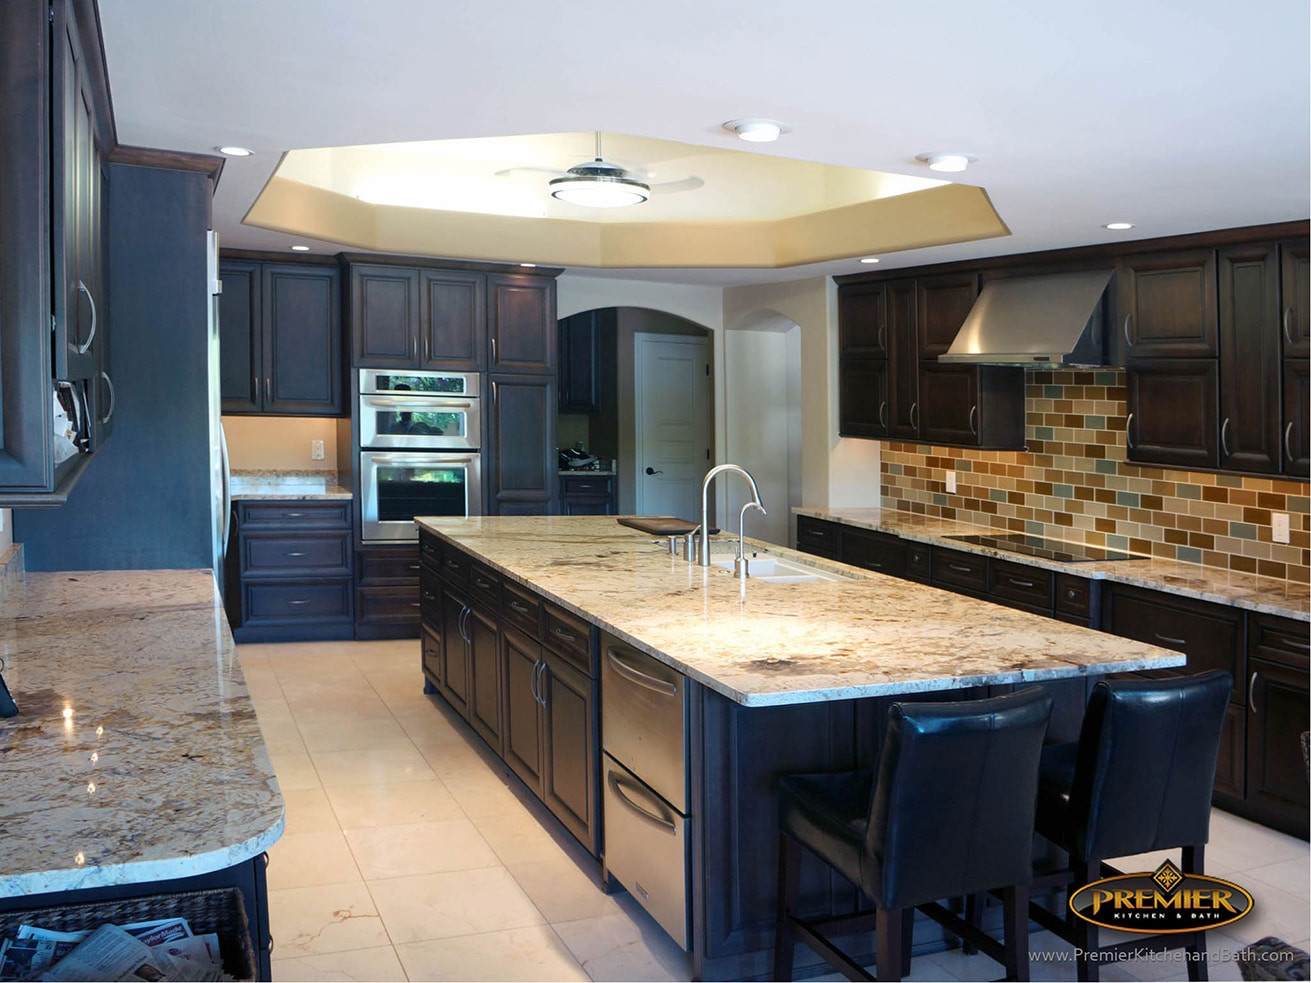 Kitchen And Bath Remodeling Contractors
 Kitchen Remodeling Contractors Phoenix AZ